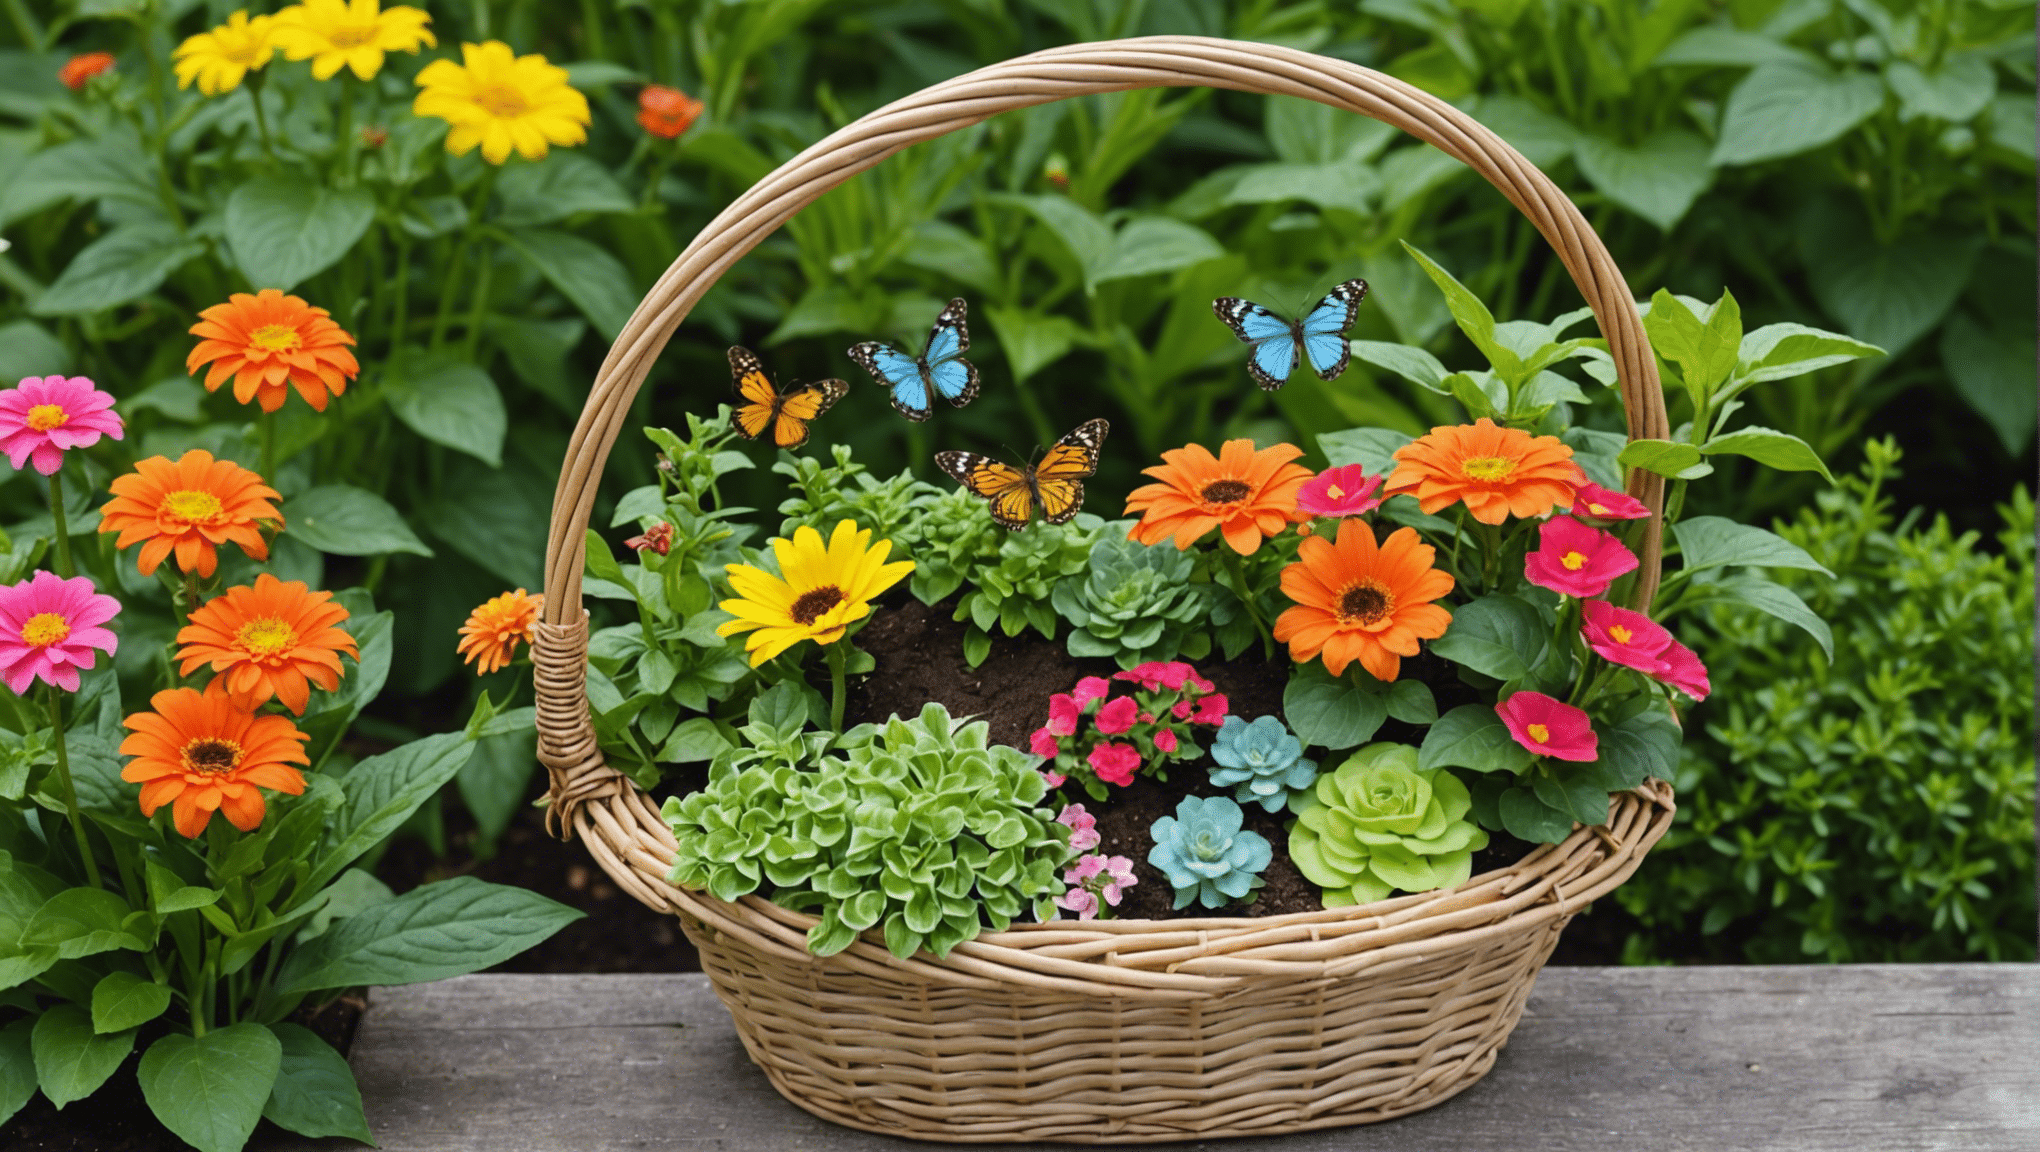 discover creative and unique diy gardening gift basket ideas to surprise your loved ones.